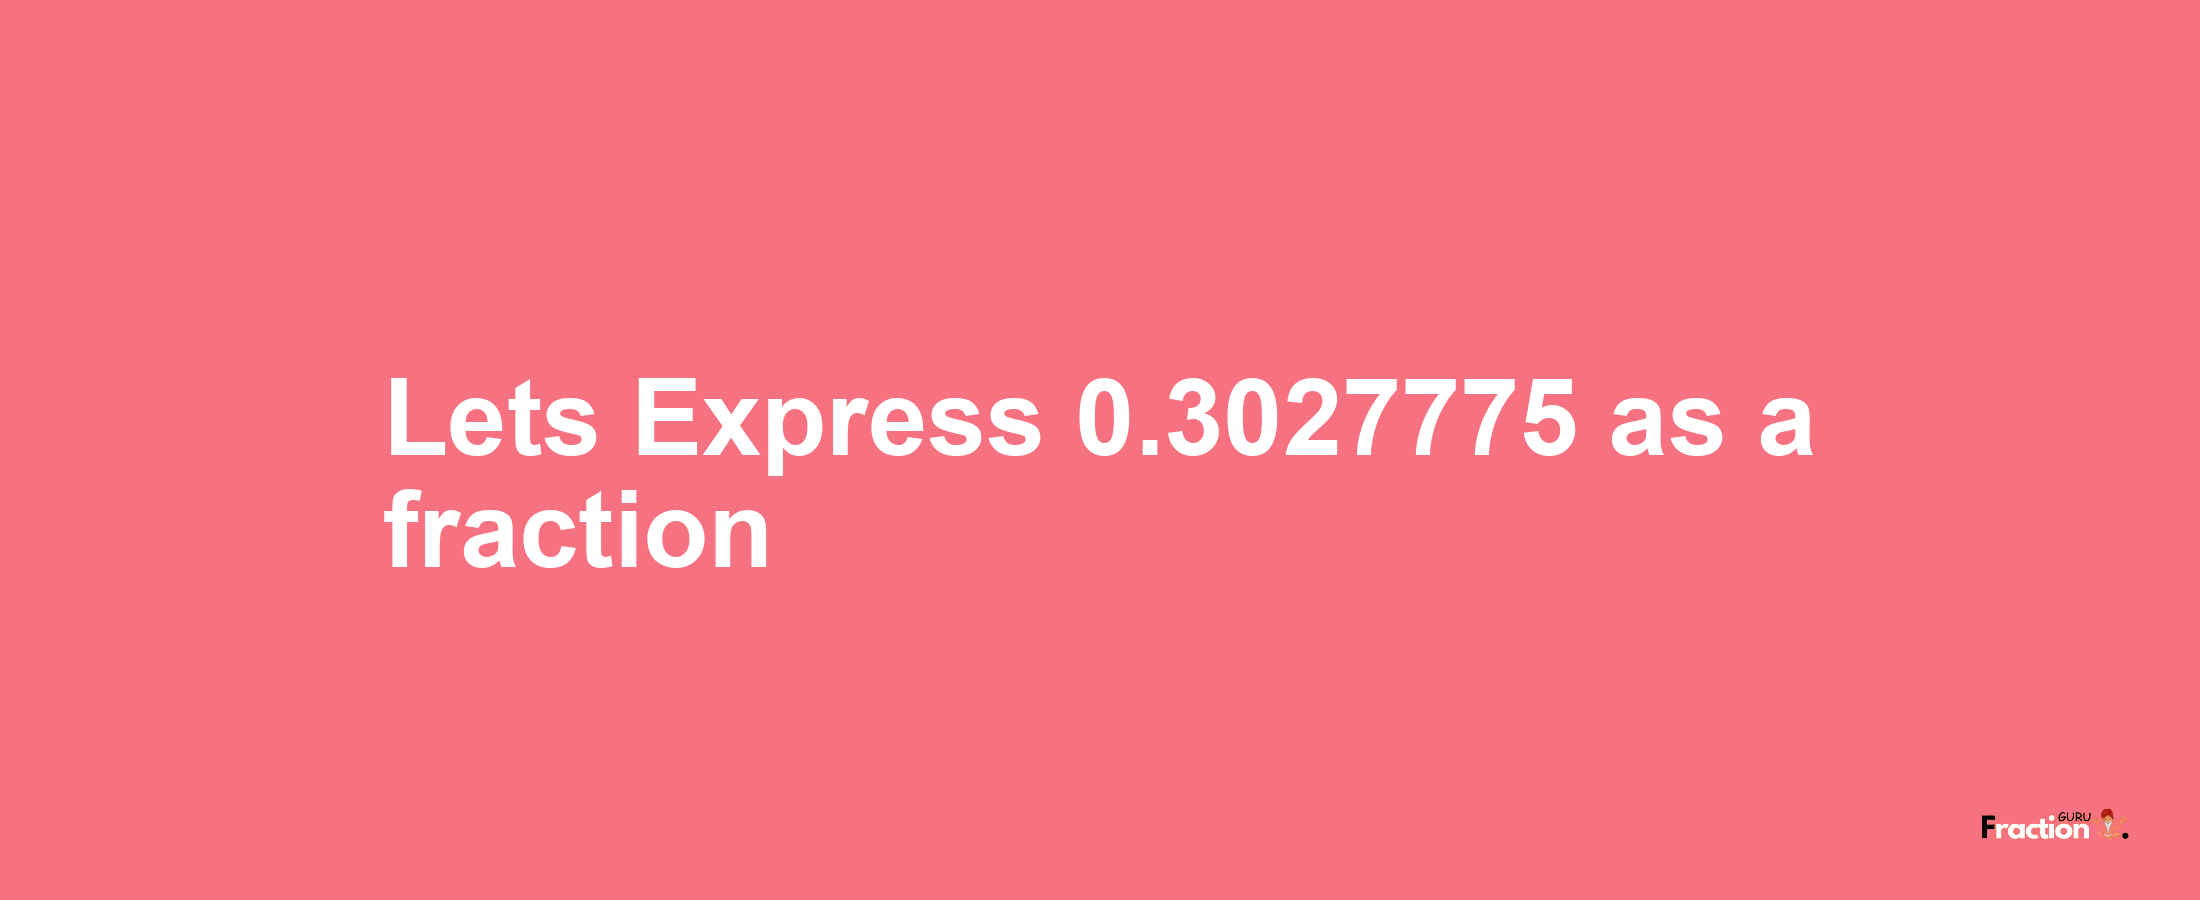 Lets Express 0.3027775 as afraction